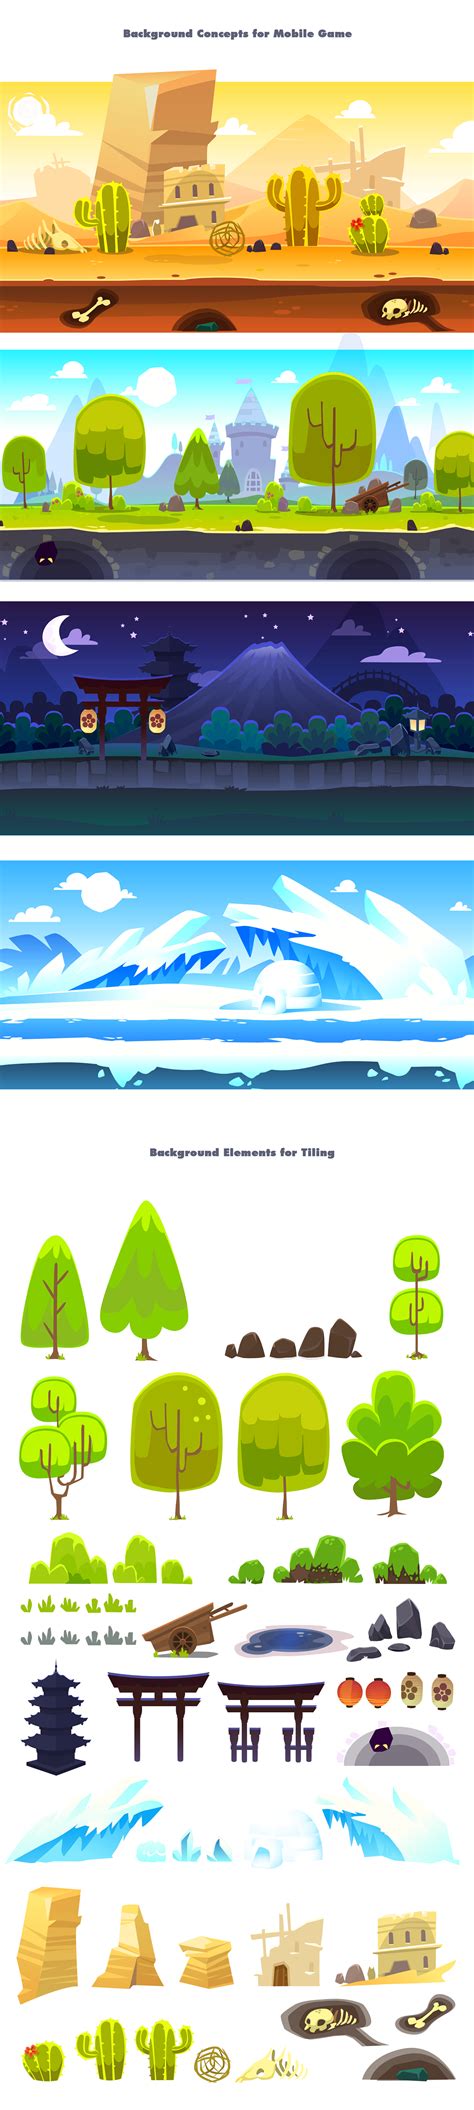 Misc Background Concepts On Behance Game Background Game Design